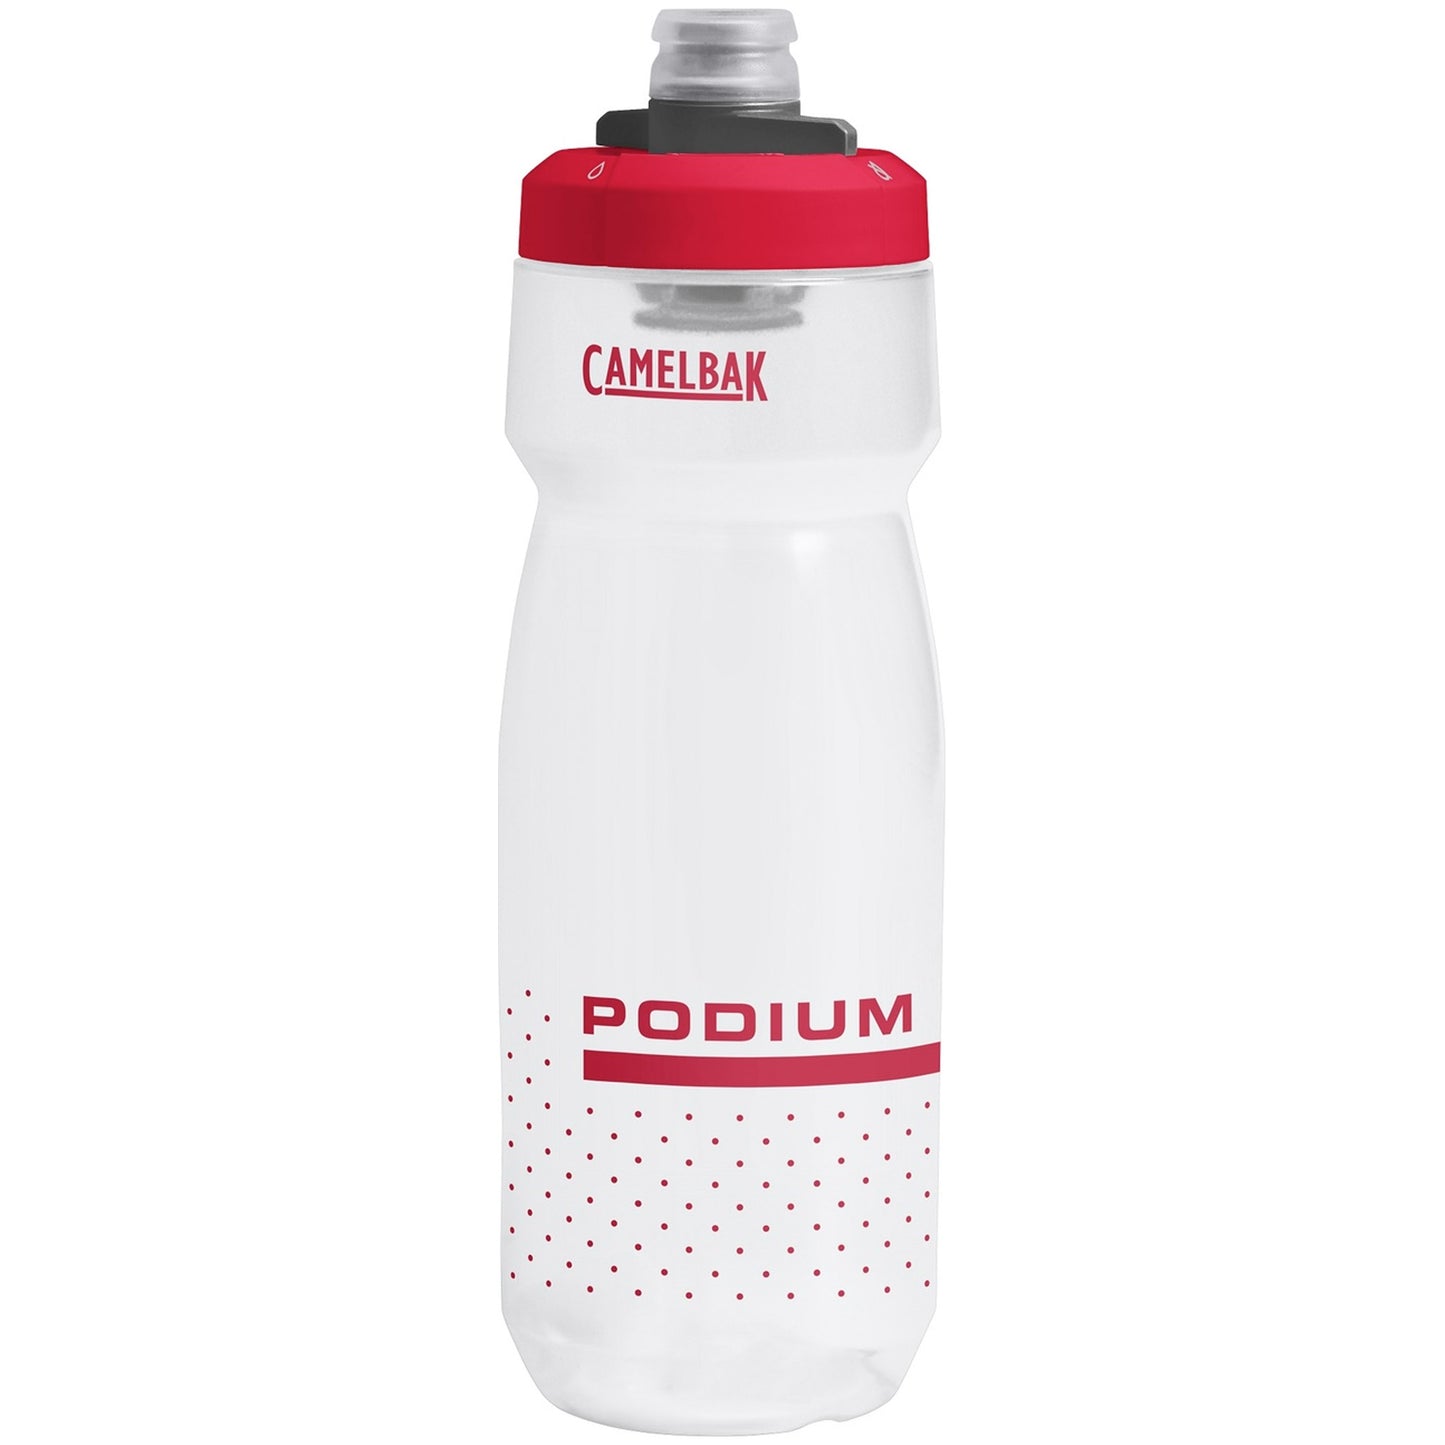 Camelbak Podium 700ml Bottle, Fiery Red, buy now at Woolys Wheels